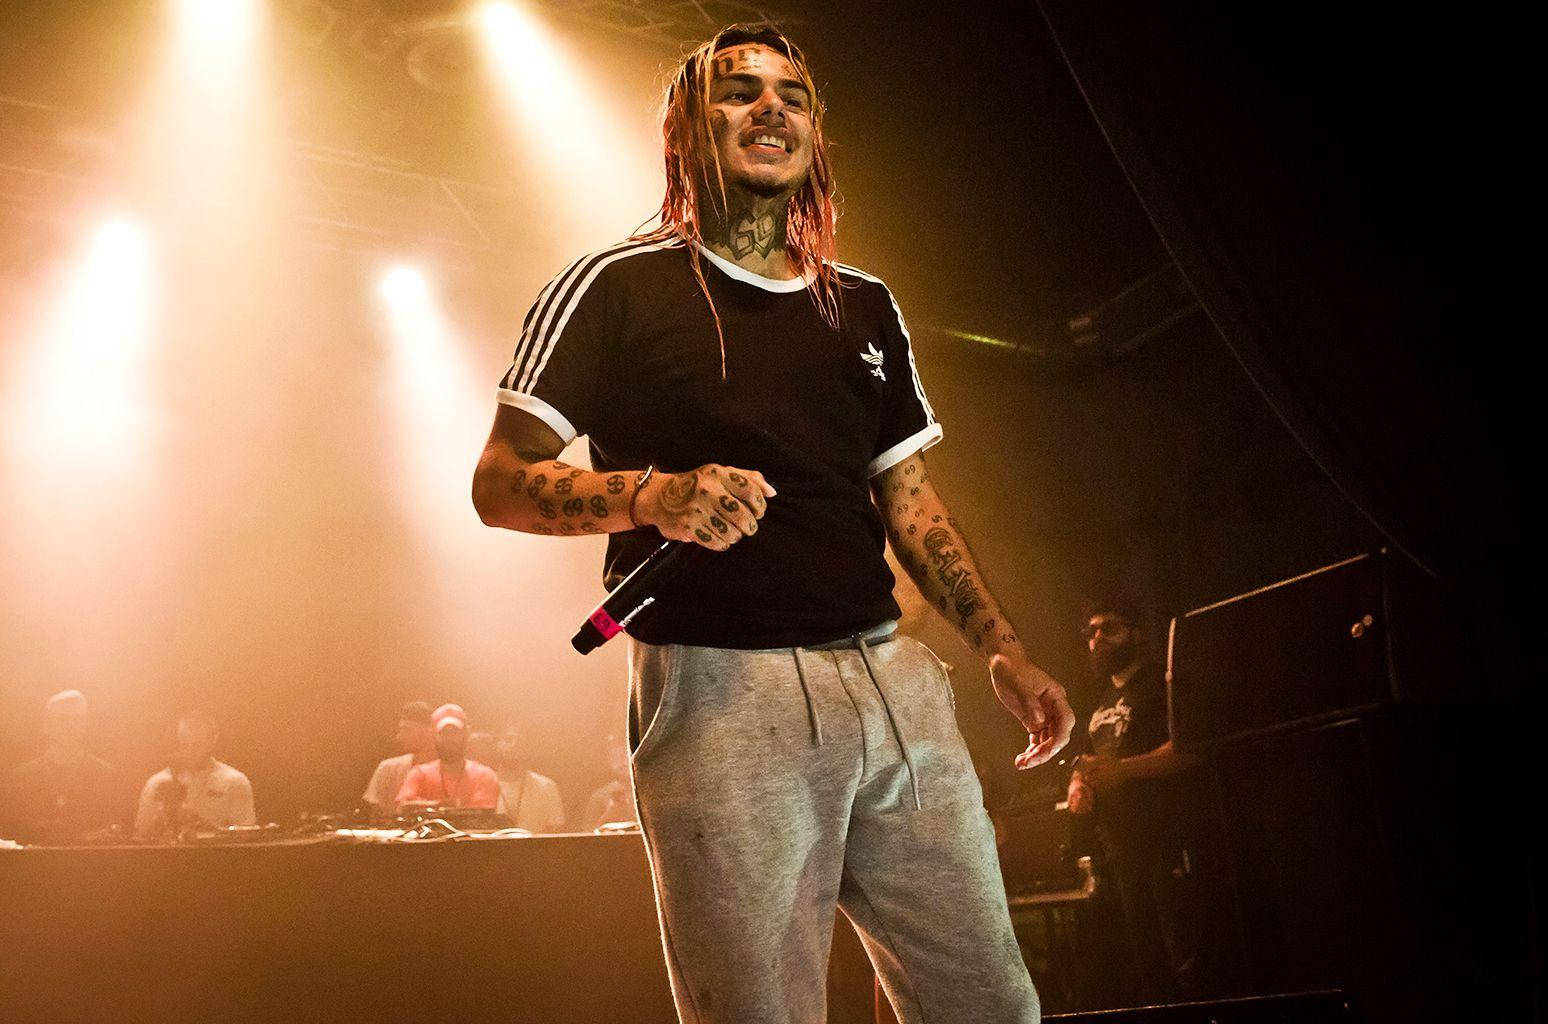 6ix9ine Performing On Stage Background